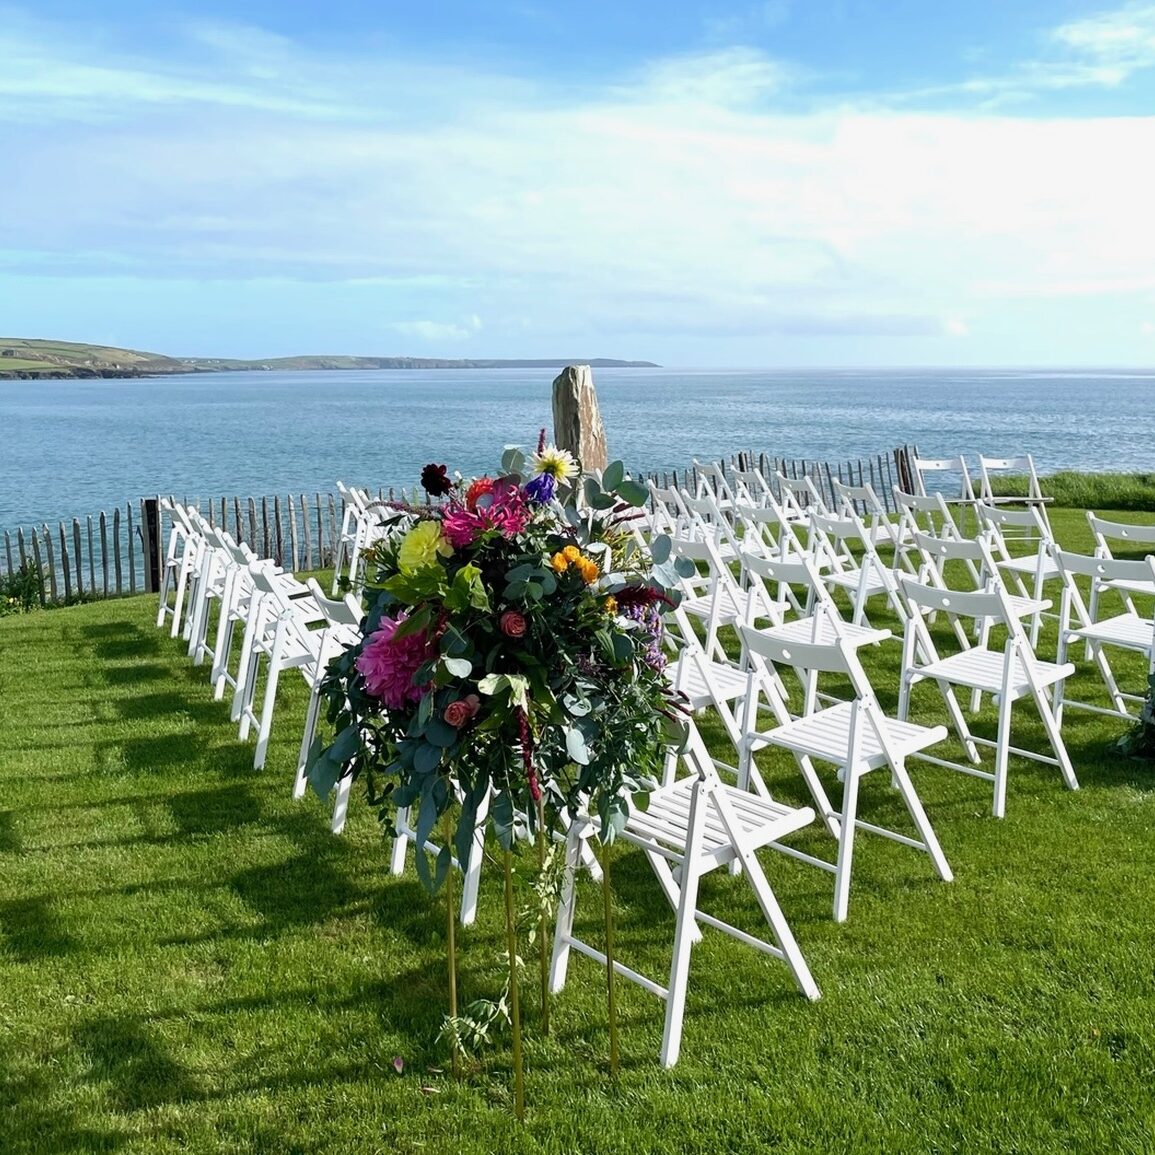 Getting married in Ireland - Outdoor legal wedding ceremony by Caroline McCarthy - Registered Solemniser and Celebrant Cork, Kerry, Tipperary, Limerick, Kildare